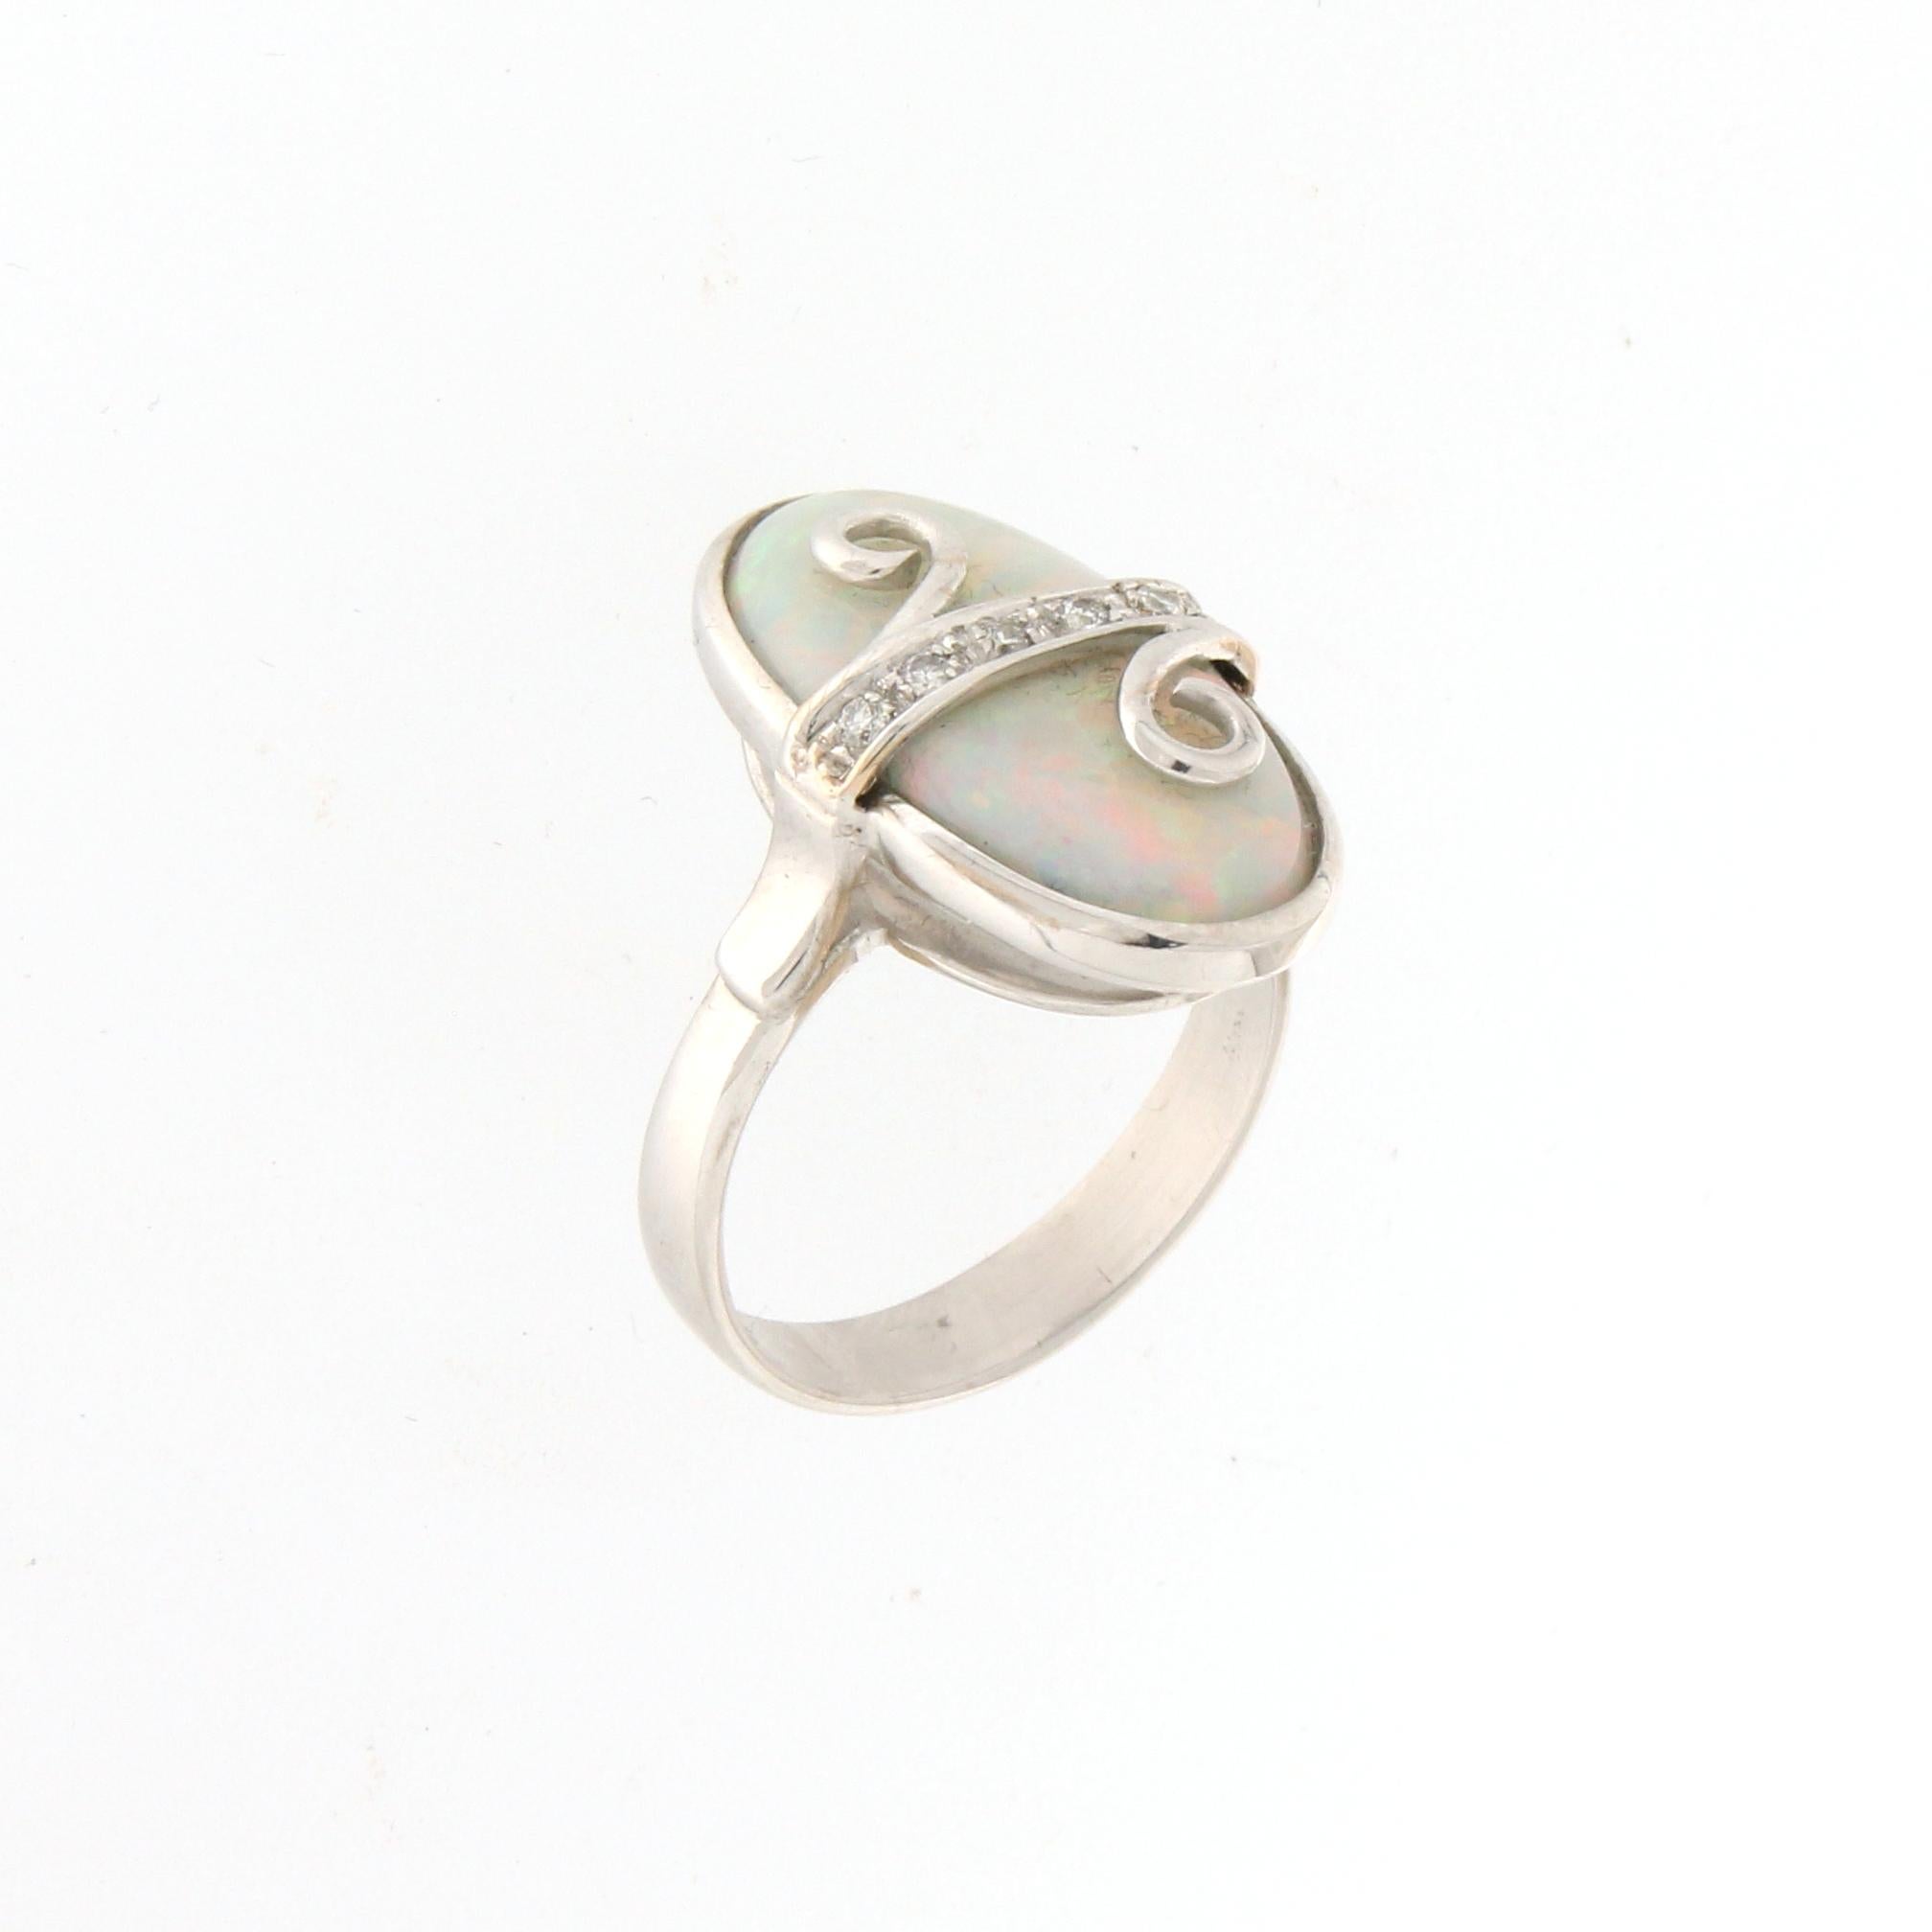 18 karat white gold cocktail ring. Handmade by our artisans assembled with diamonds and Australian opal

Diamonds weight 0.10 karat
Ring total weight 7.20 grams
Ring size 7.75 US 16.40 Ita
(all rings are can be resized)